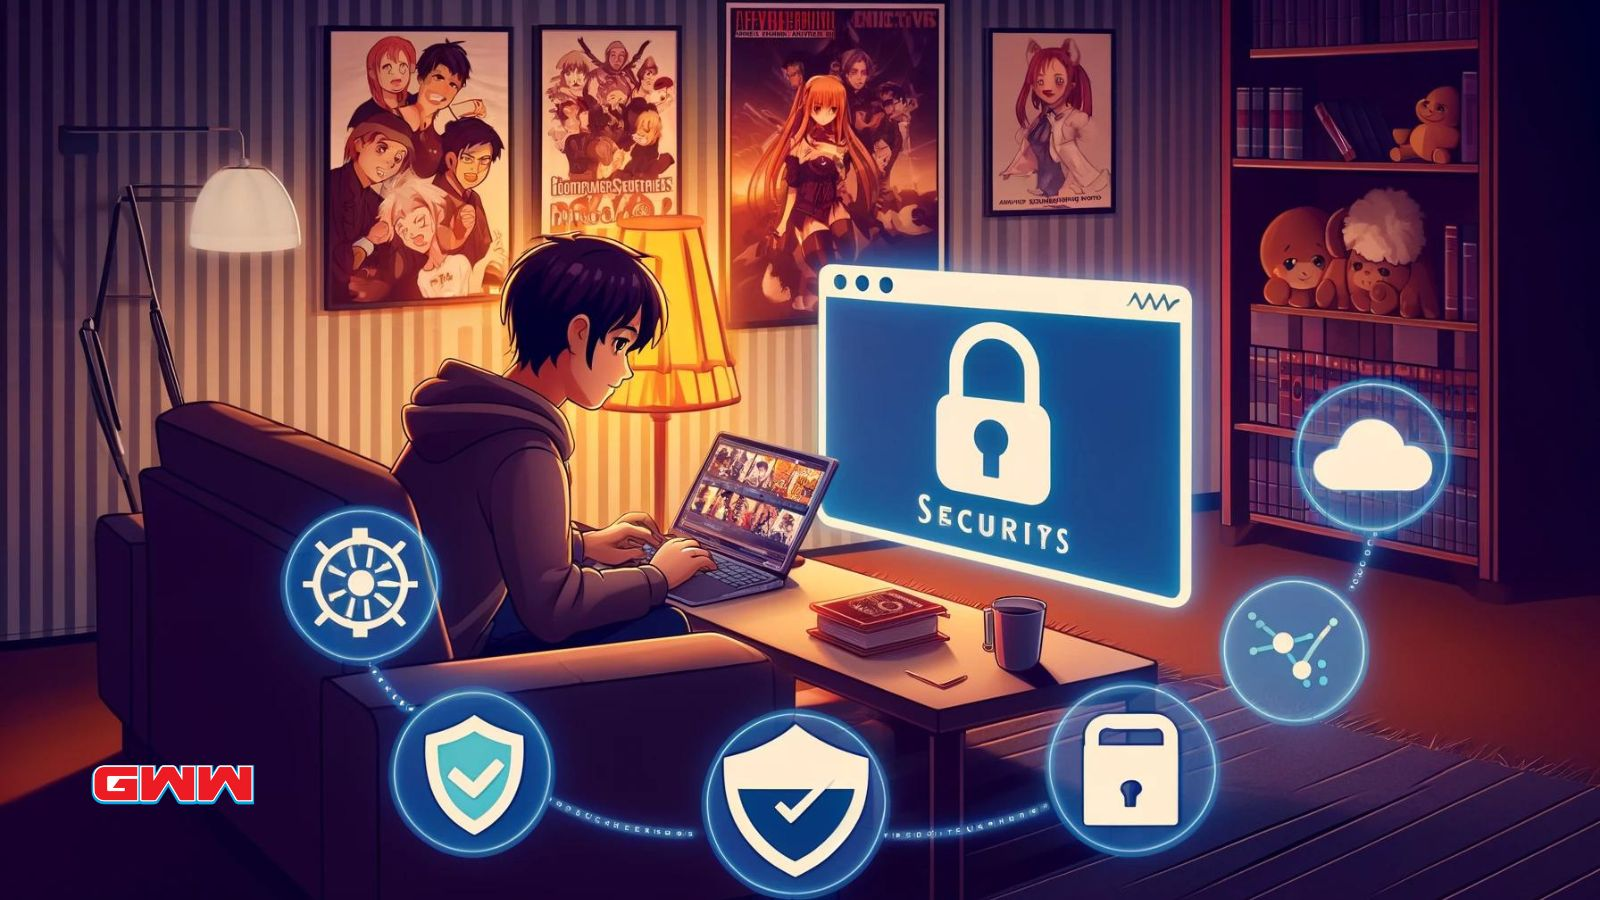 A scene illustrating how to safely watch anime online